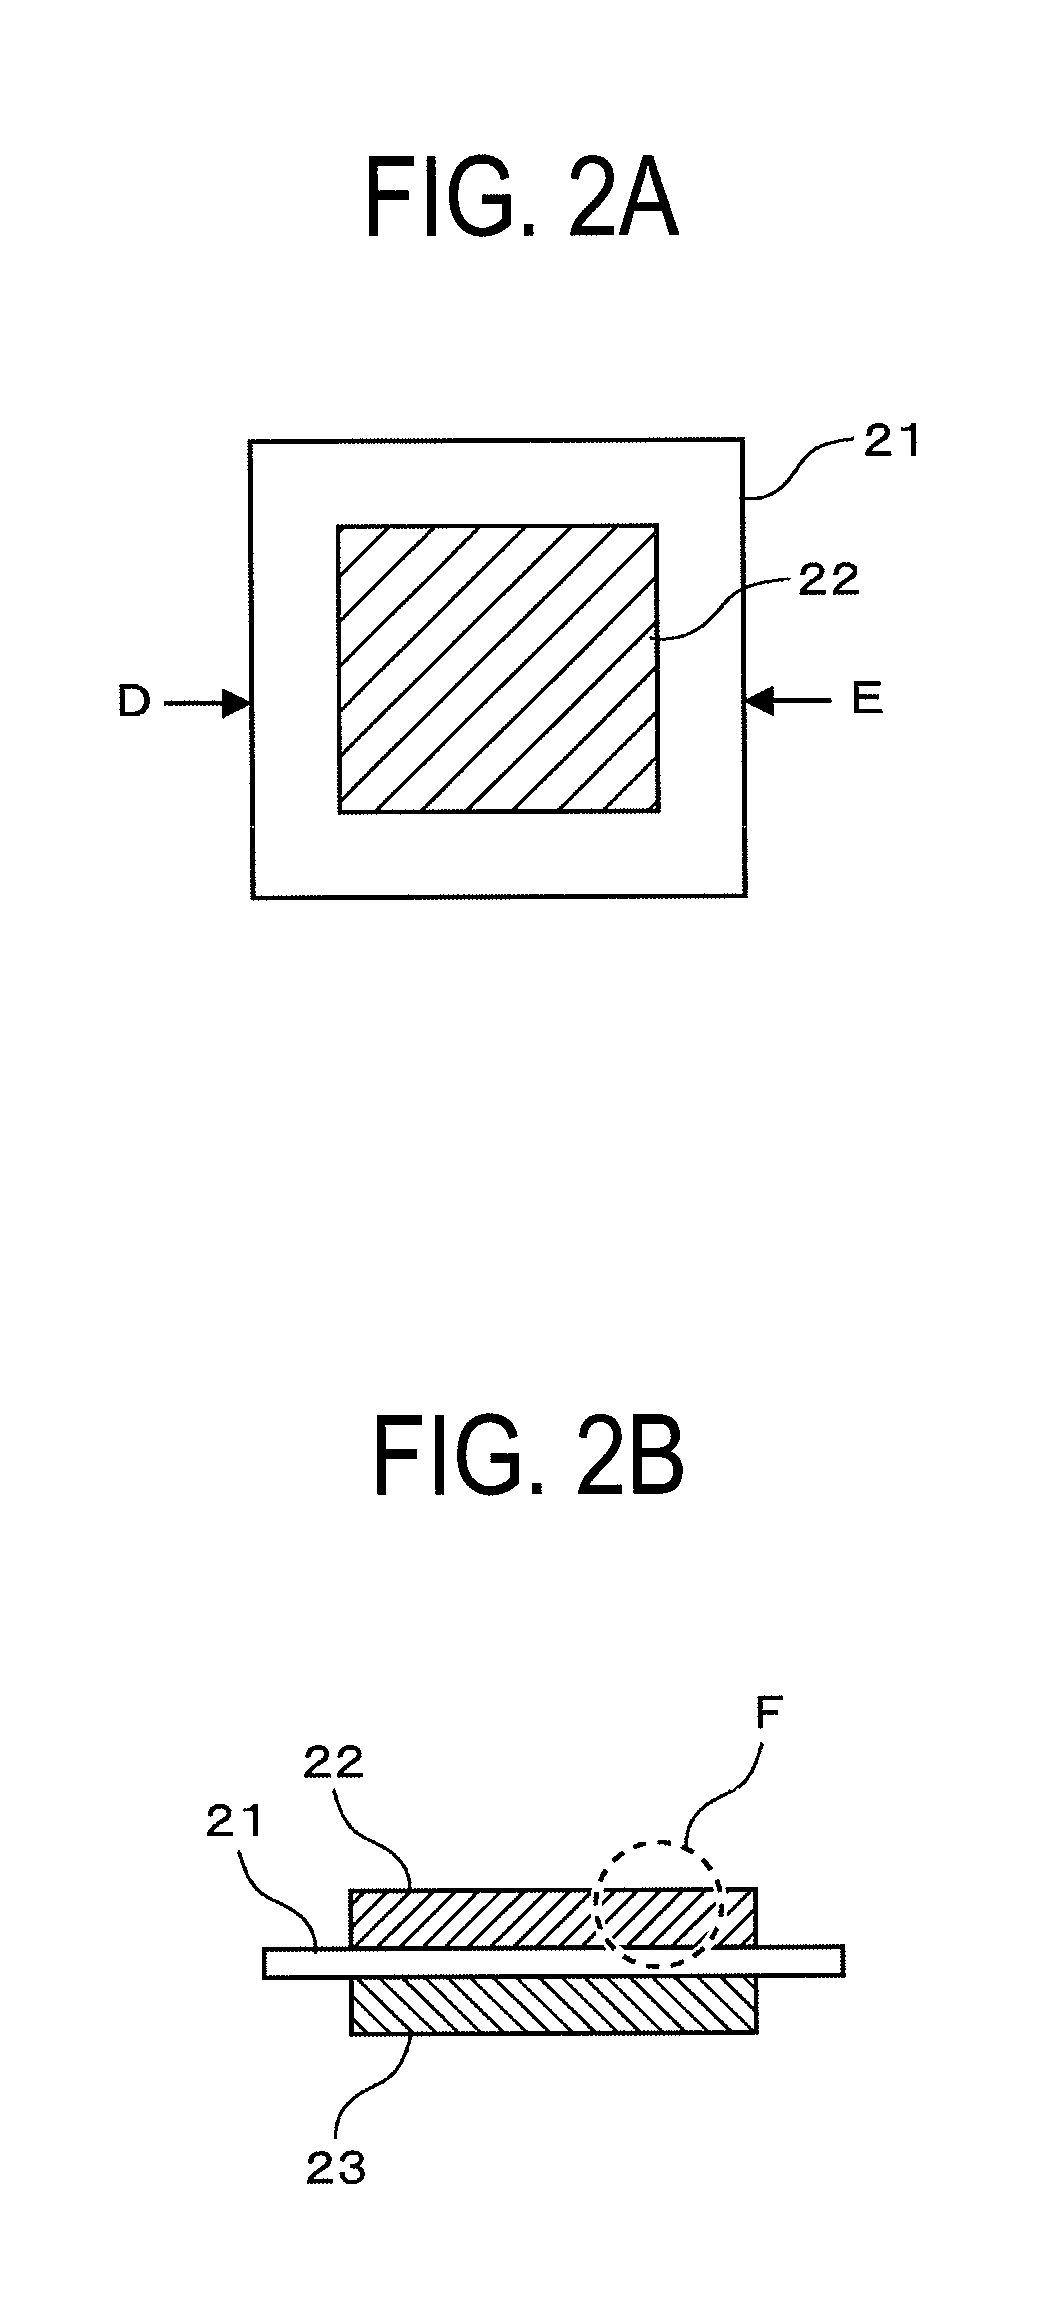 Membrane Electrode Assembly and Organic Hydride Manufacturing Device